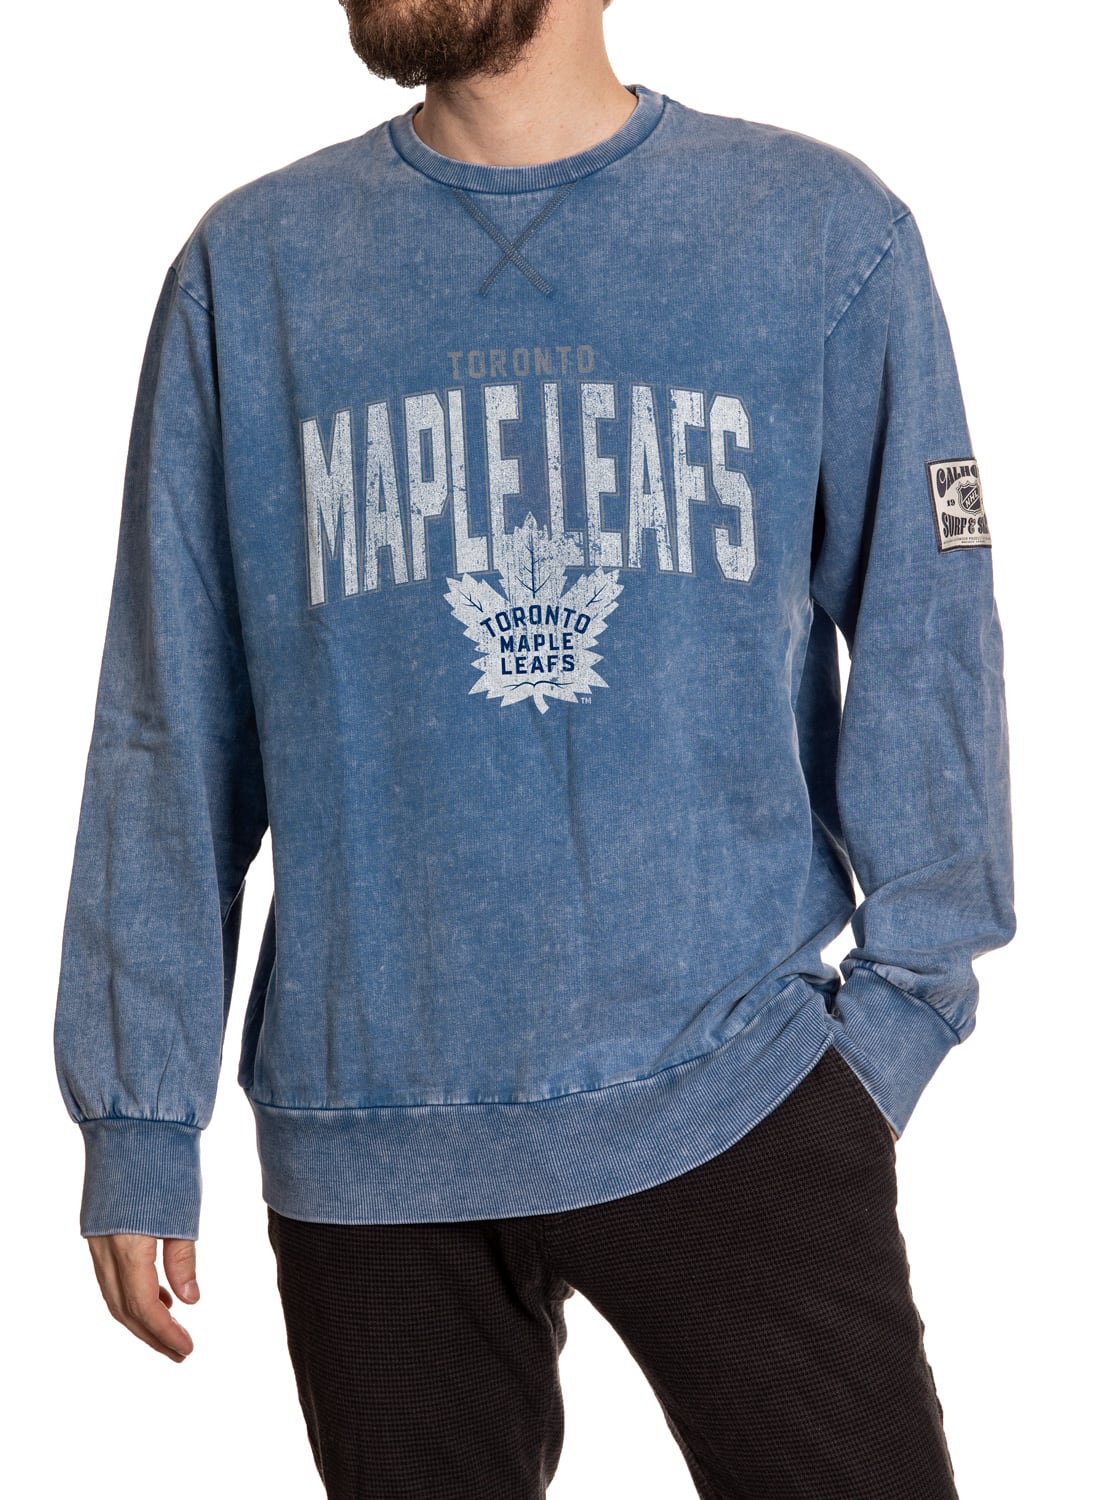 Toronto Maple Leafs Acid Wash Crewneck in Blue Front View